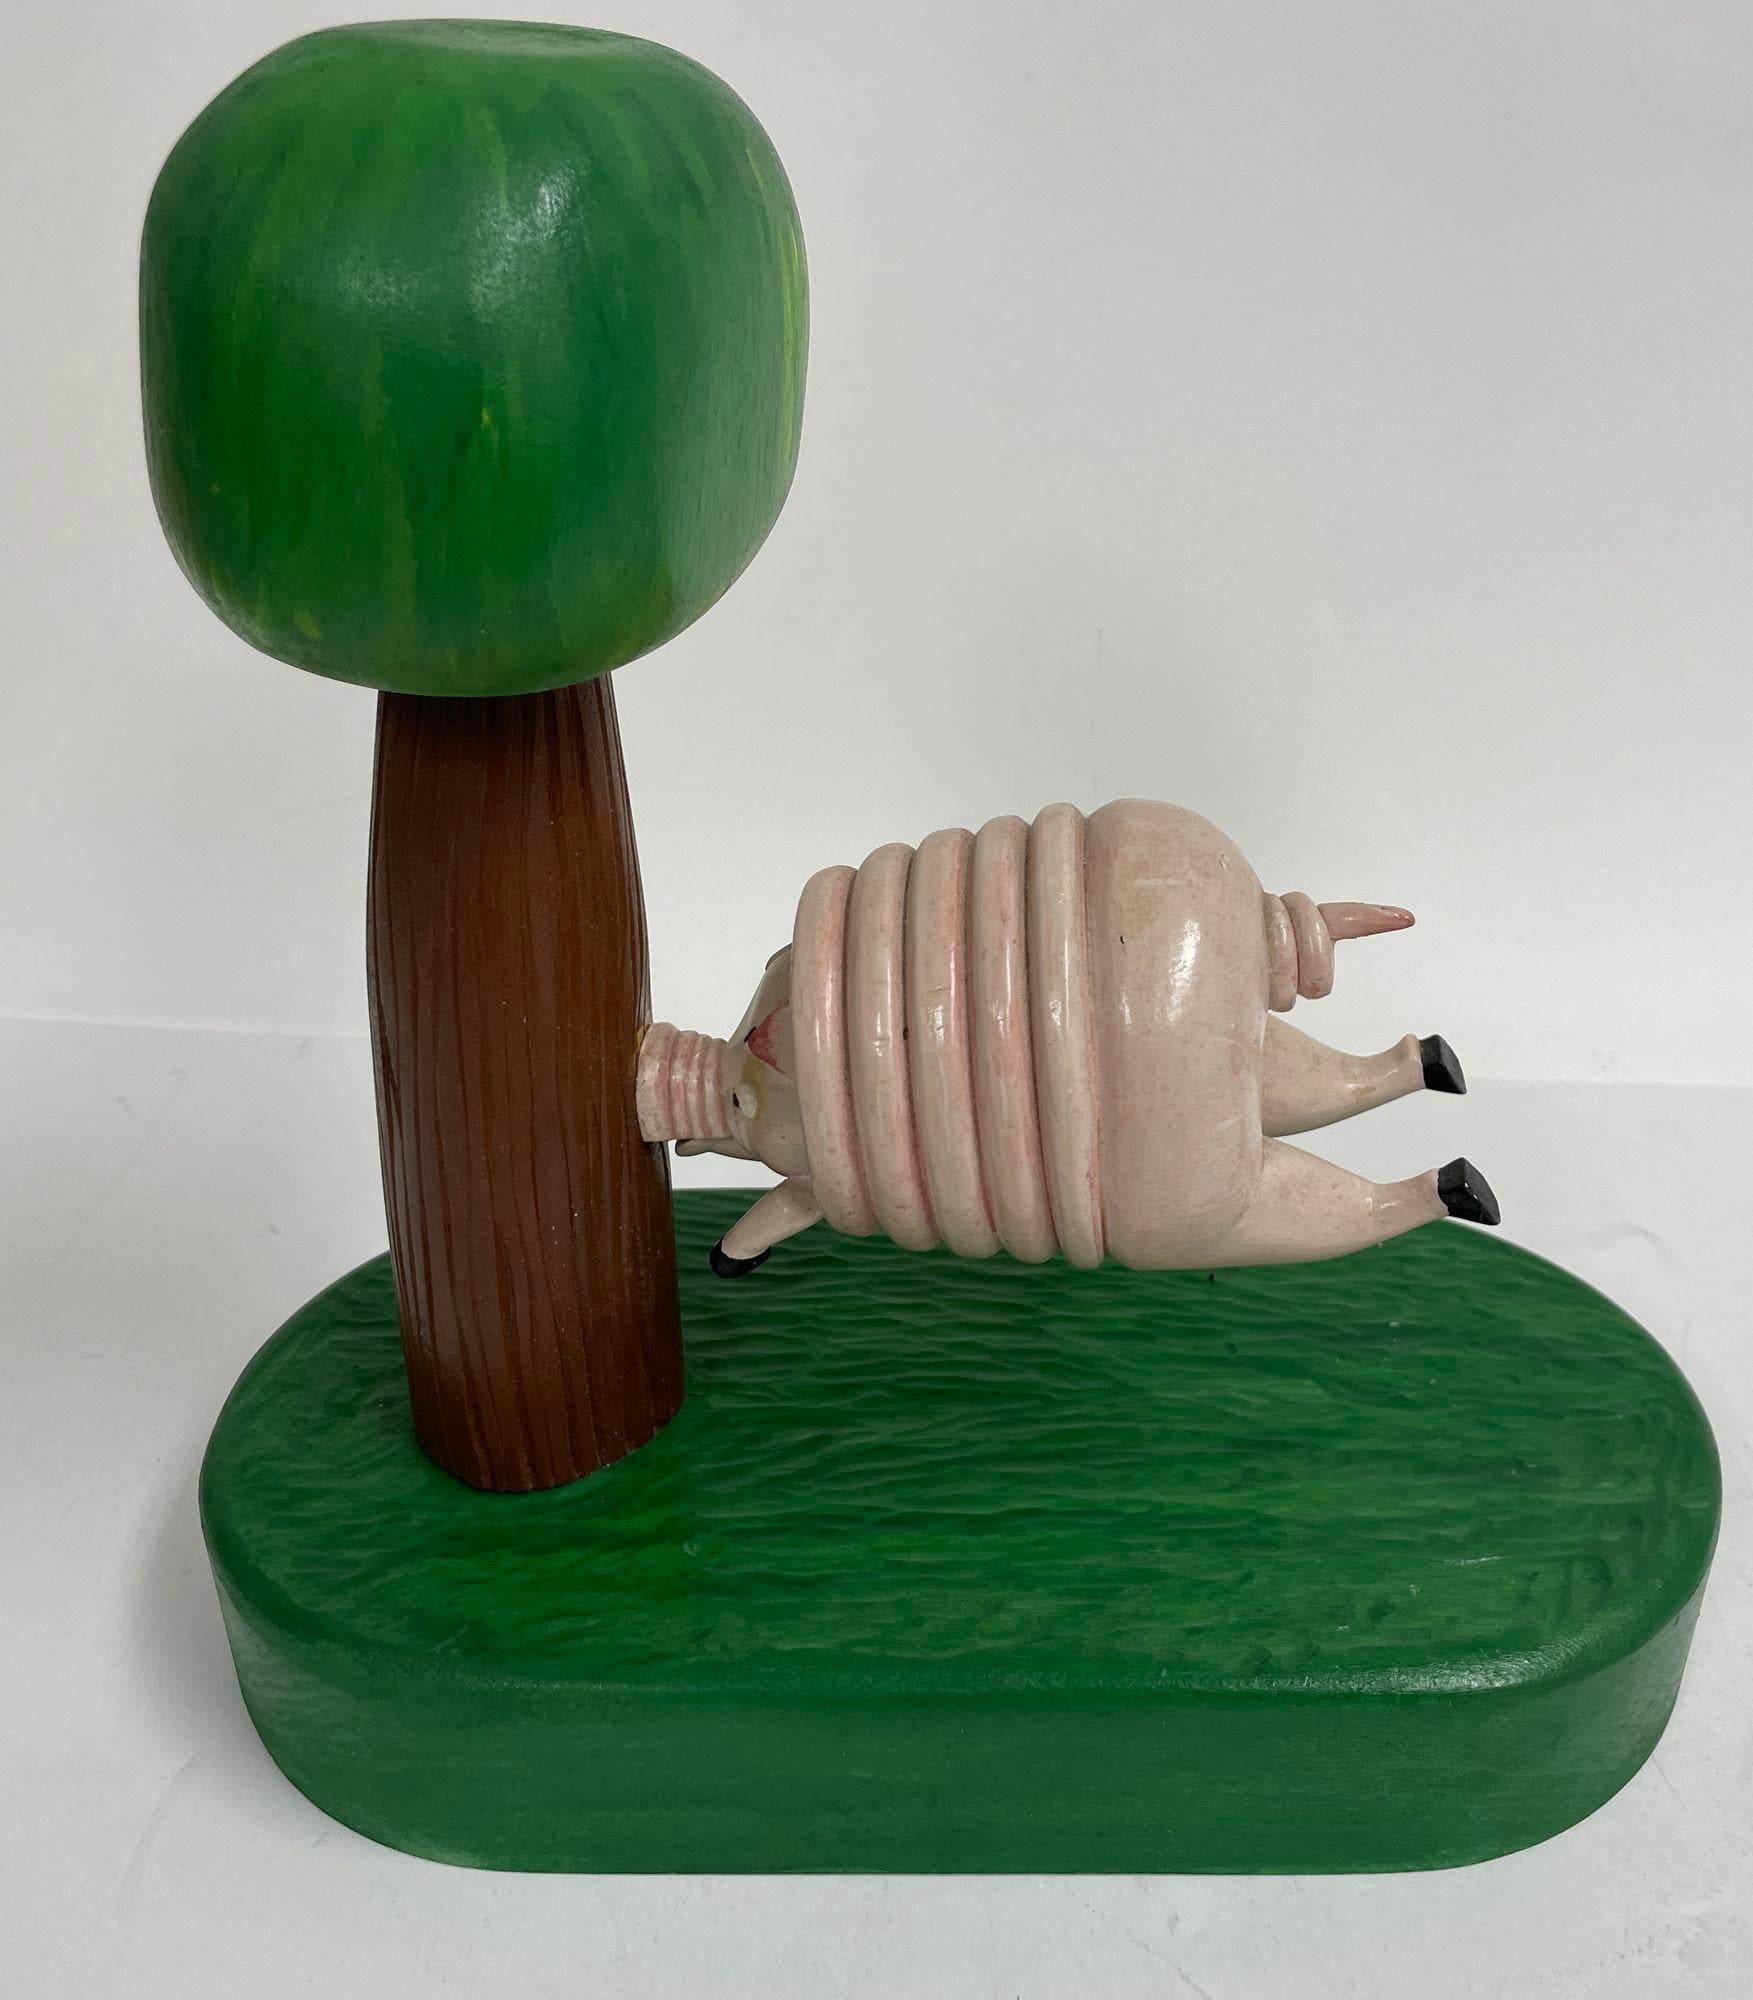 Vintage Folk Art Wood Sculpture of a Pig running into a Tree by R Harper 1991
This piece is a handcrafted wooden sculpture by artist R Harper signed and dated 4-91.
This one of a kind flying pig sculpture is made of solid wood and had been